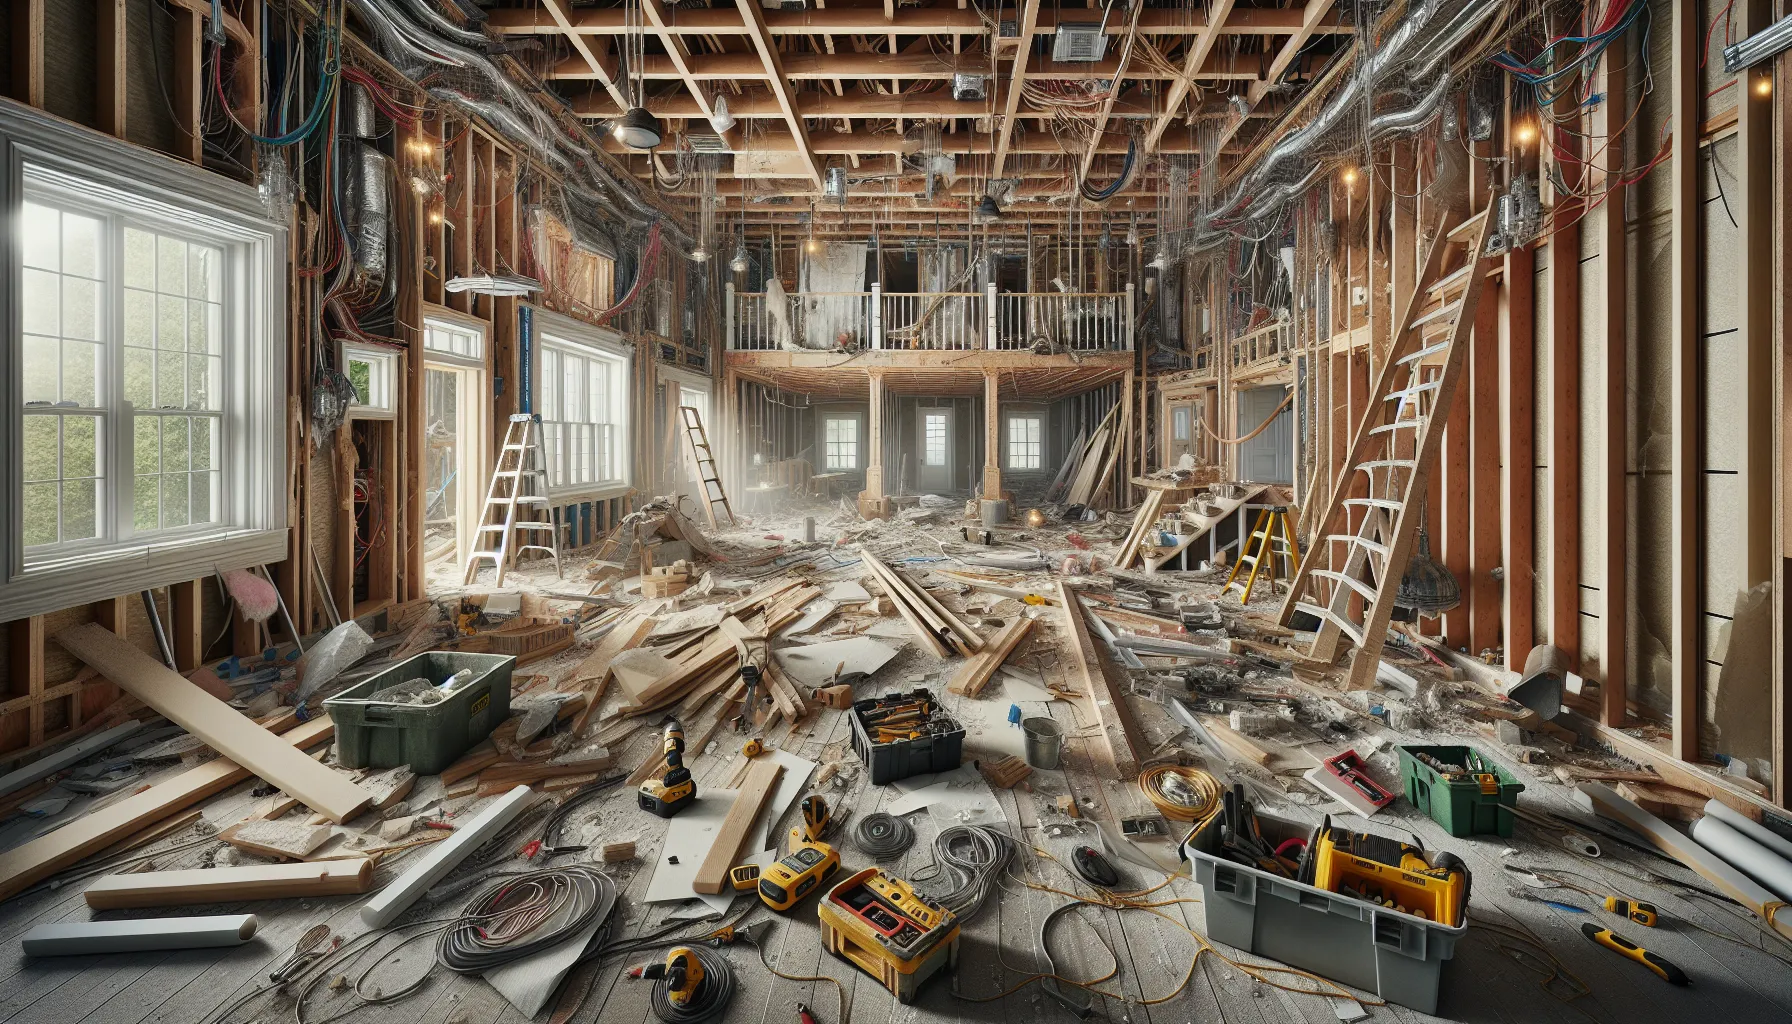 What Are The Most Challenging Home Improvement Projects?